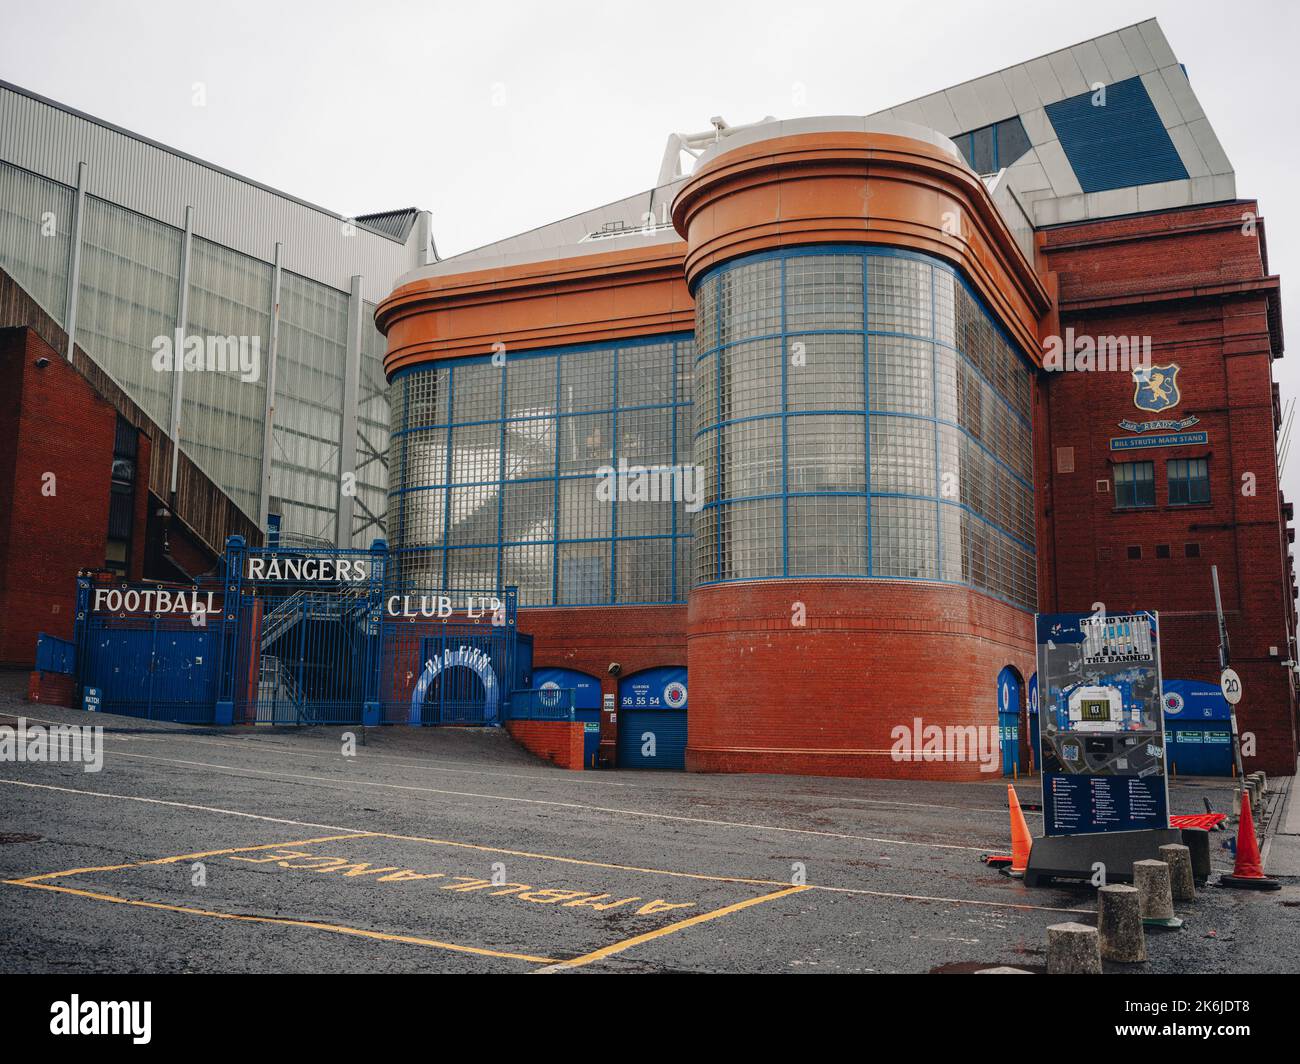 Rangers Football Club is a football club based in Glasgow. Rangers' home ground, Ibrox Stadium was designed by architect Archibald Leitch. Stock Photo